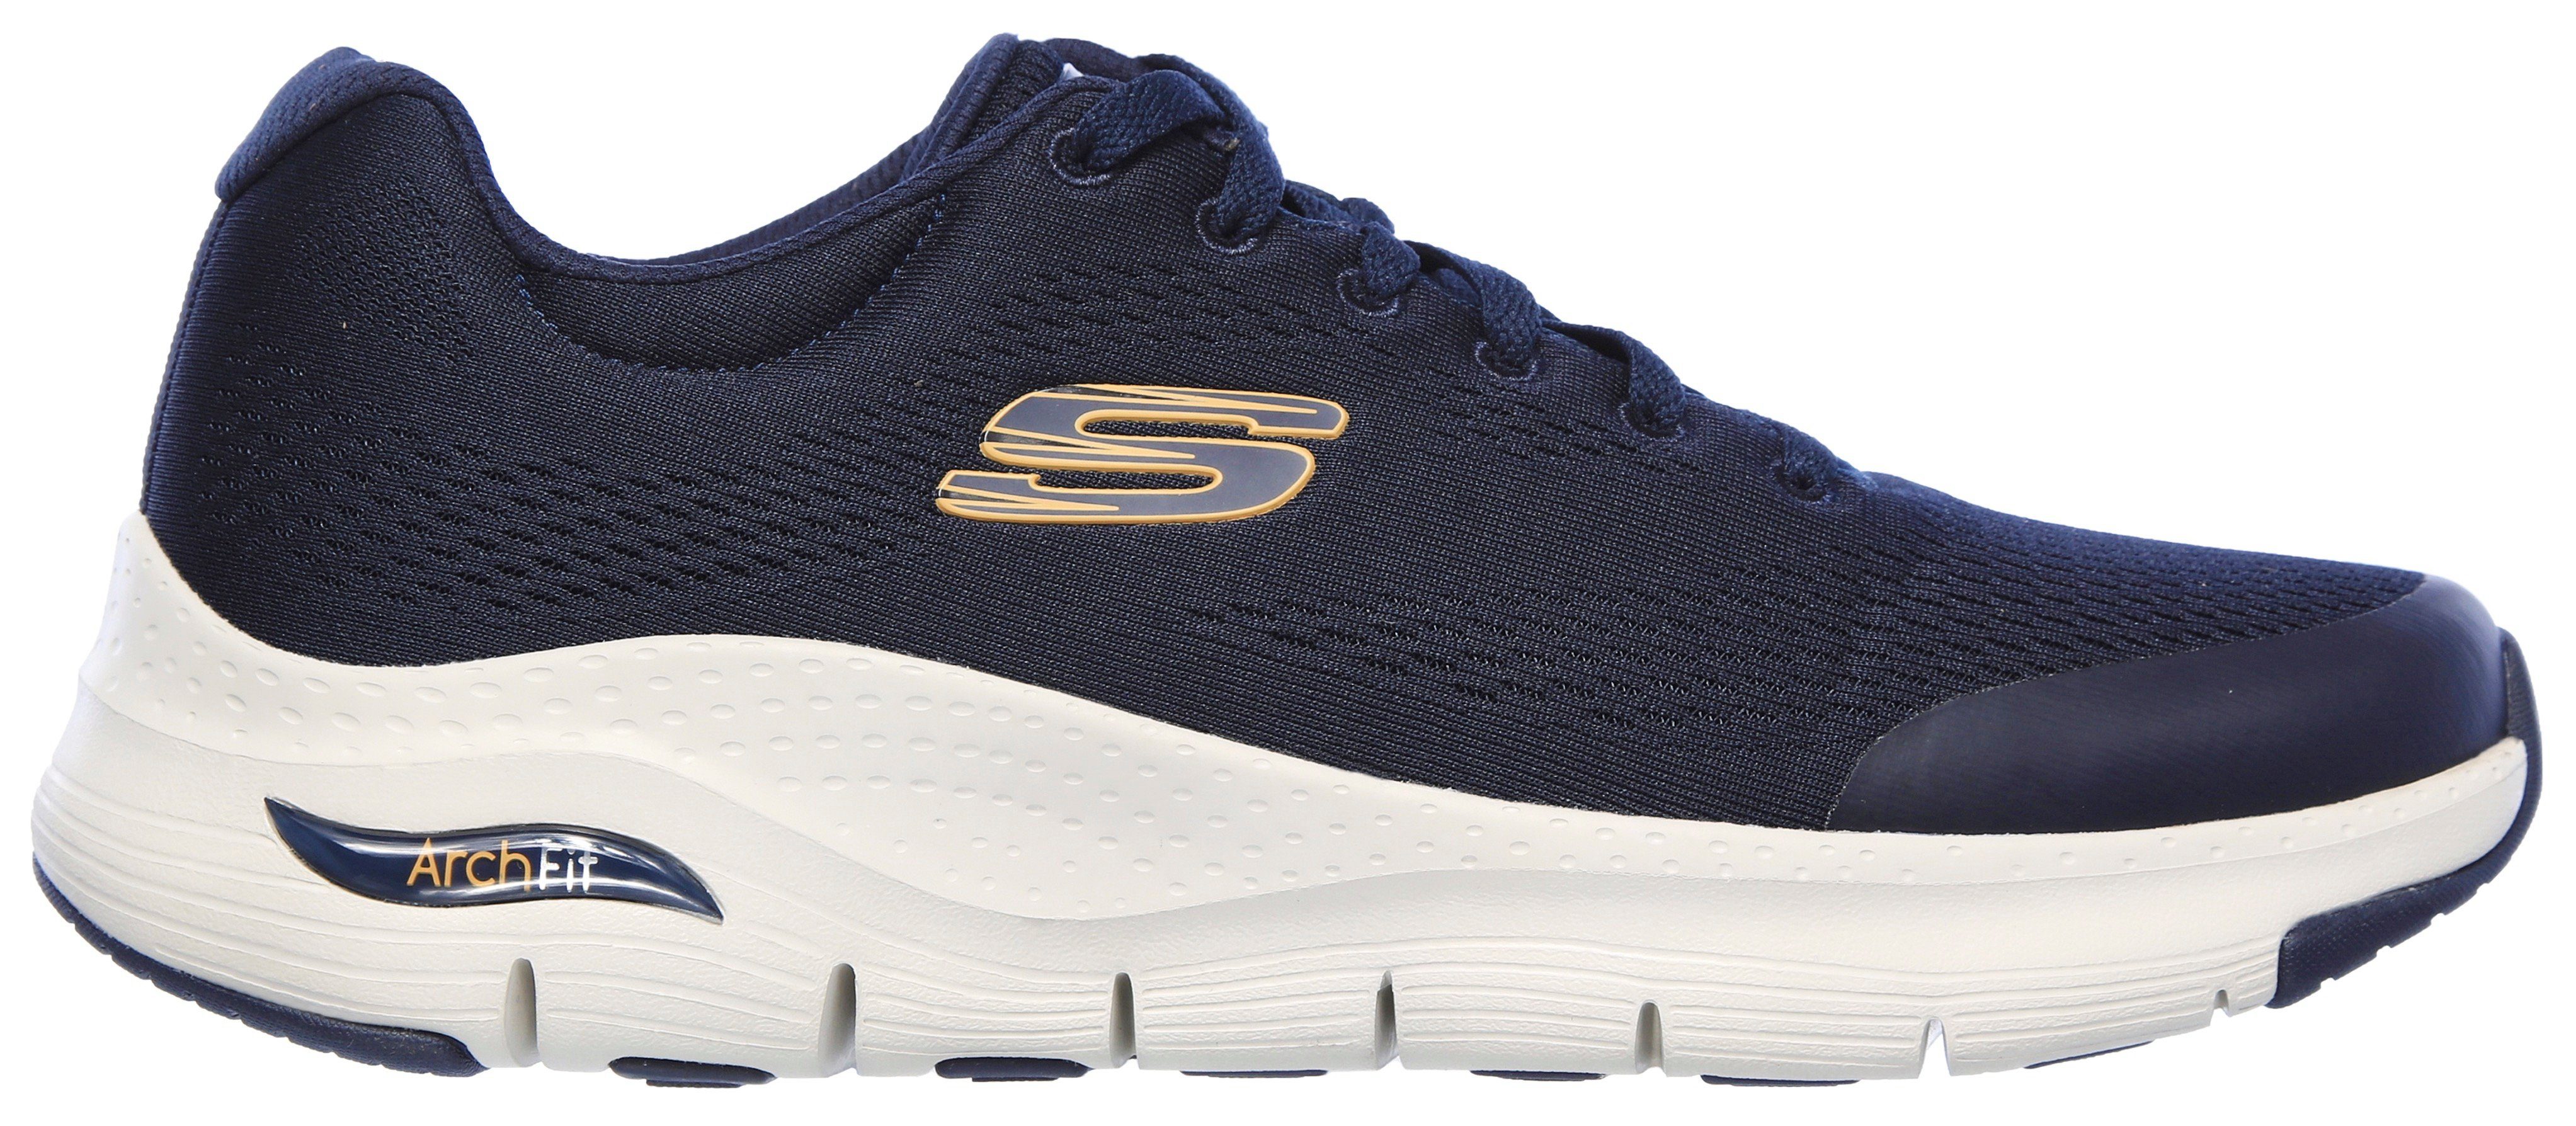 Fit-Innensohle mit FIT Skechers ARCH navy Arch Sneaker